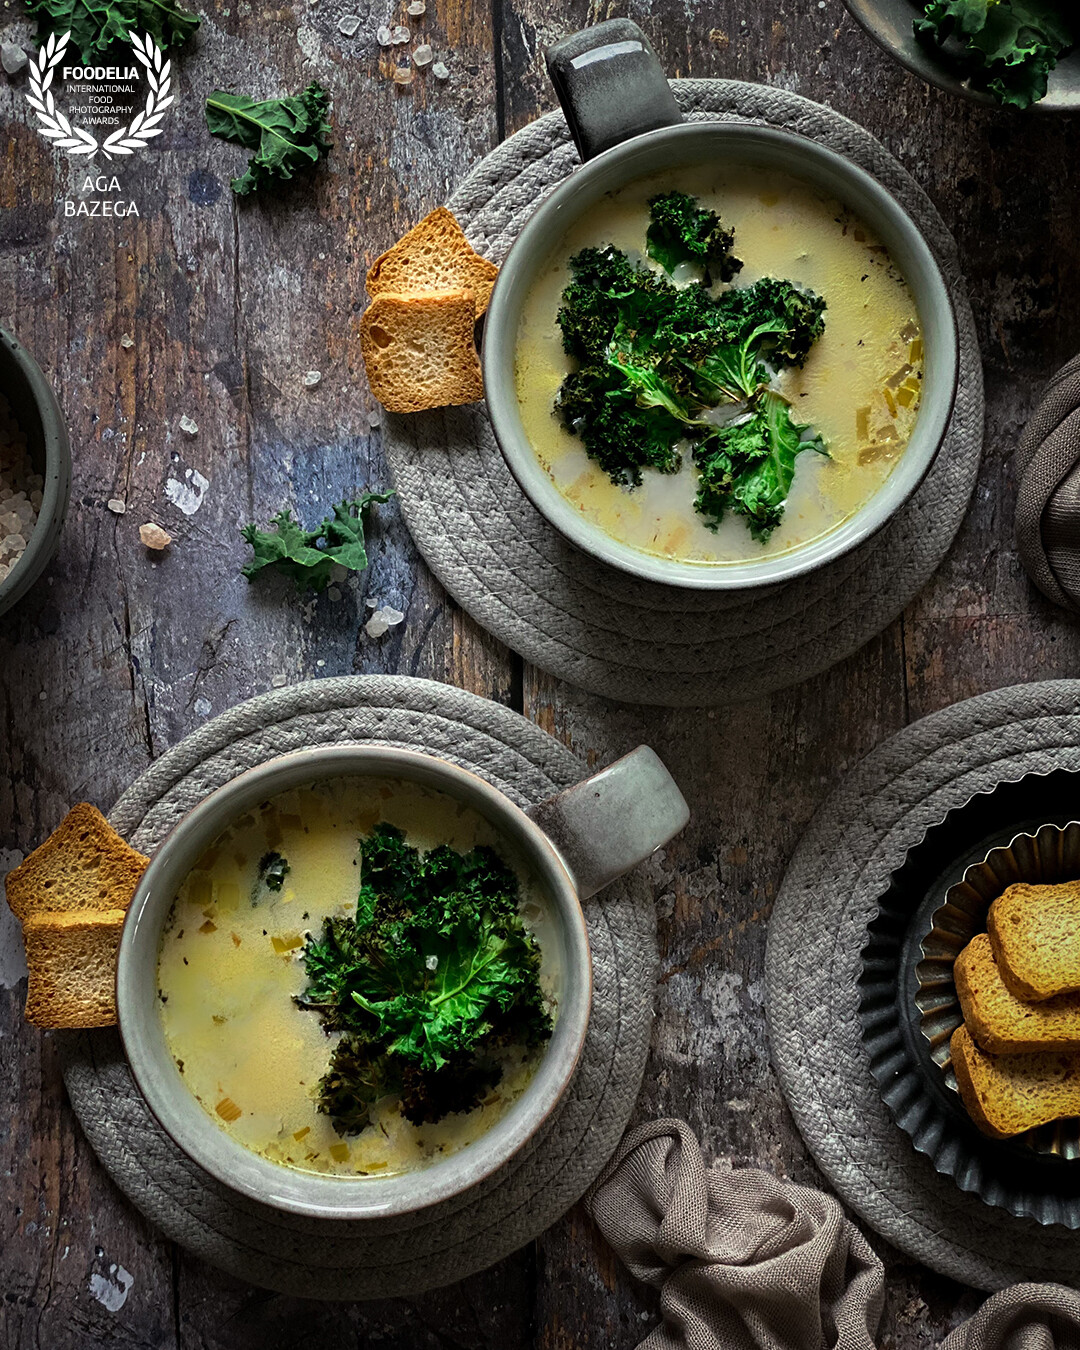 Leek-barley soup, served with kale chips, not only delicious but also a nutritious, healthy meal.